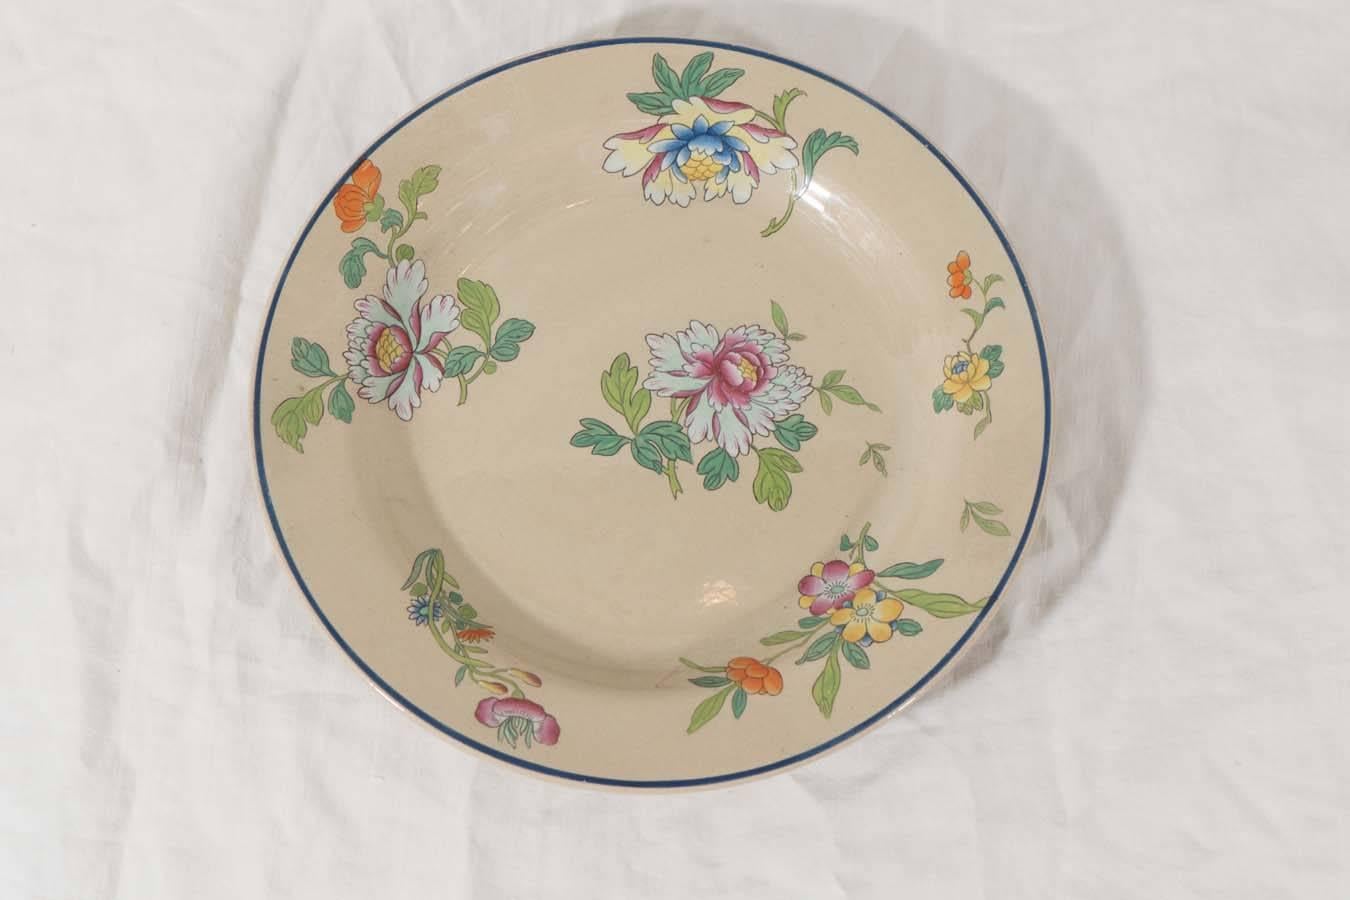 Set of Ten Wedgwood Drabware Dishes Painted with Enamel Flowers 2